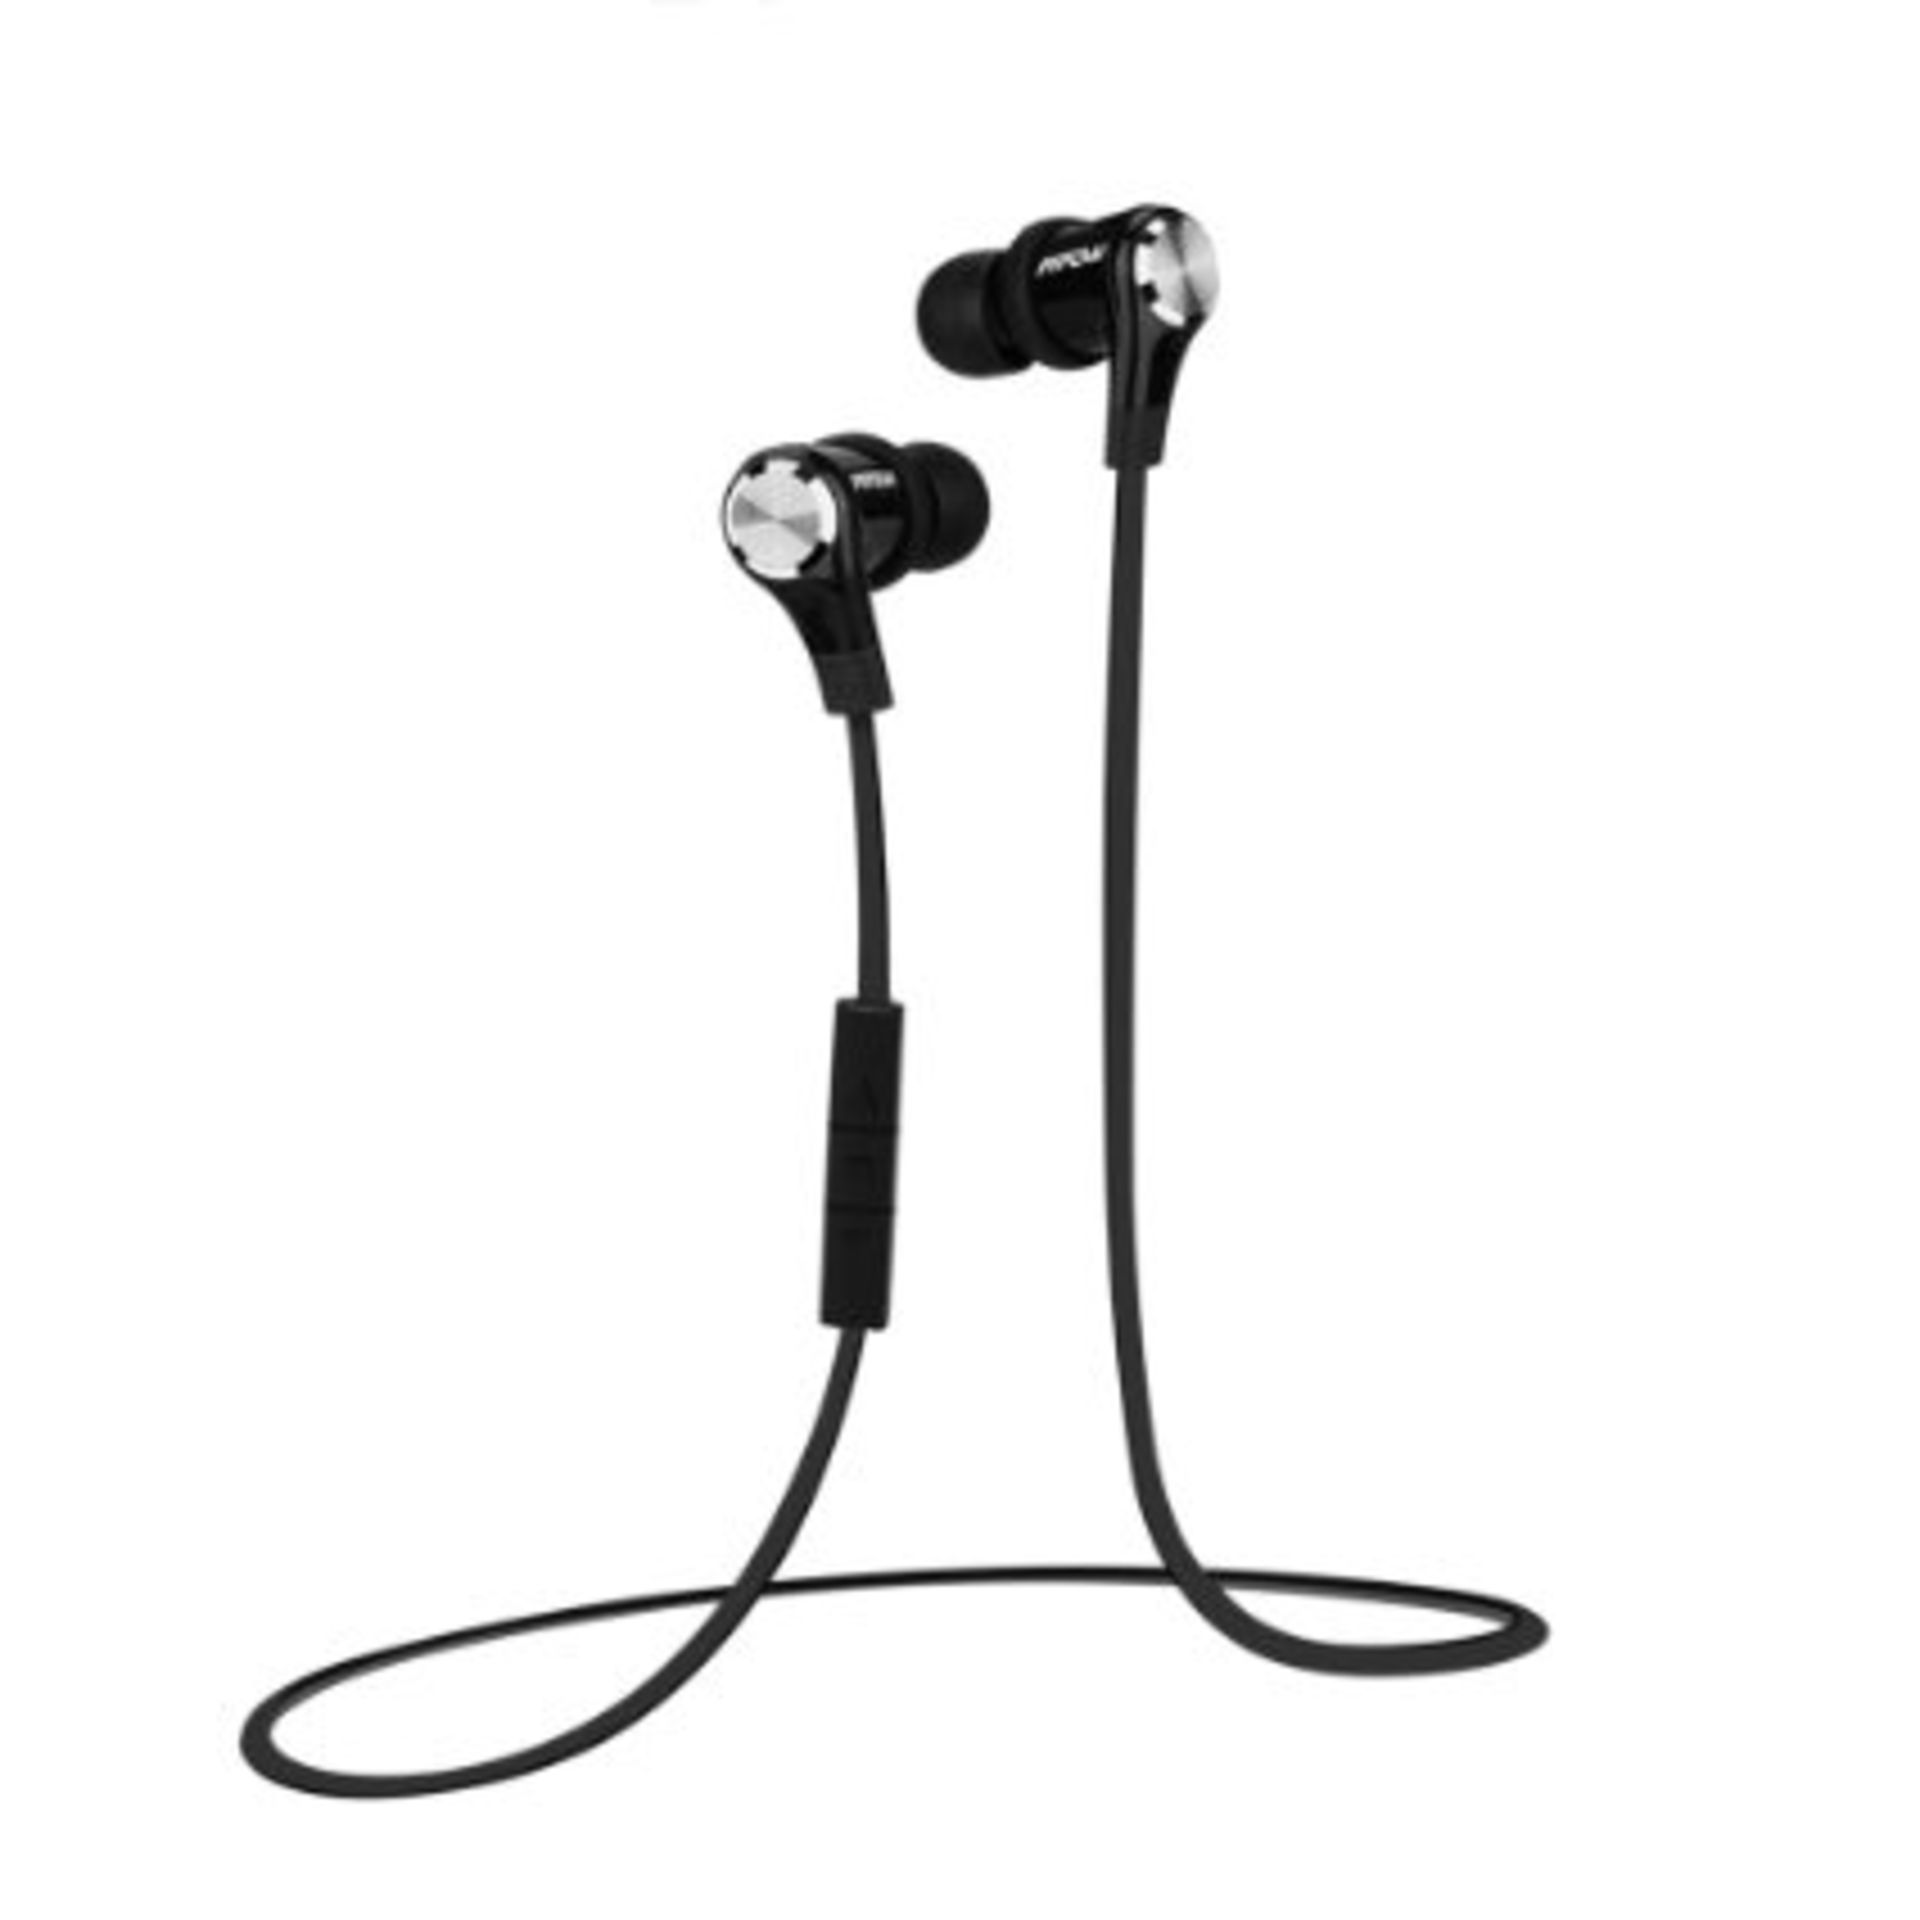 V *TRADE QTY* Brand New Pair of Bluetooth Earphones/Headset (All Boxed) - Colours and Styles/Makes - Image 2 of 7